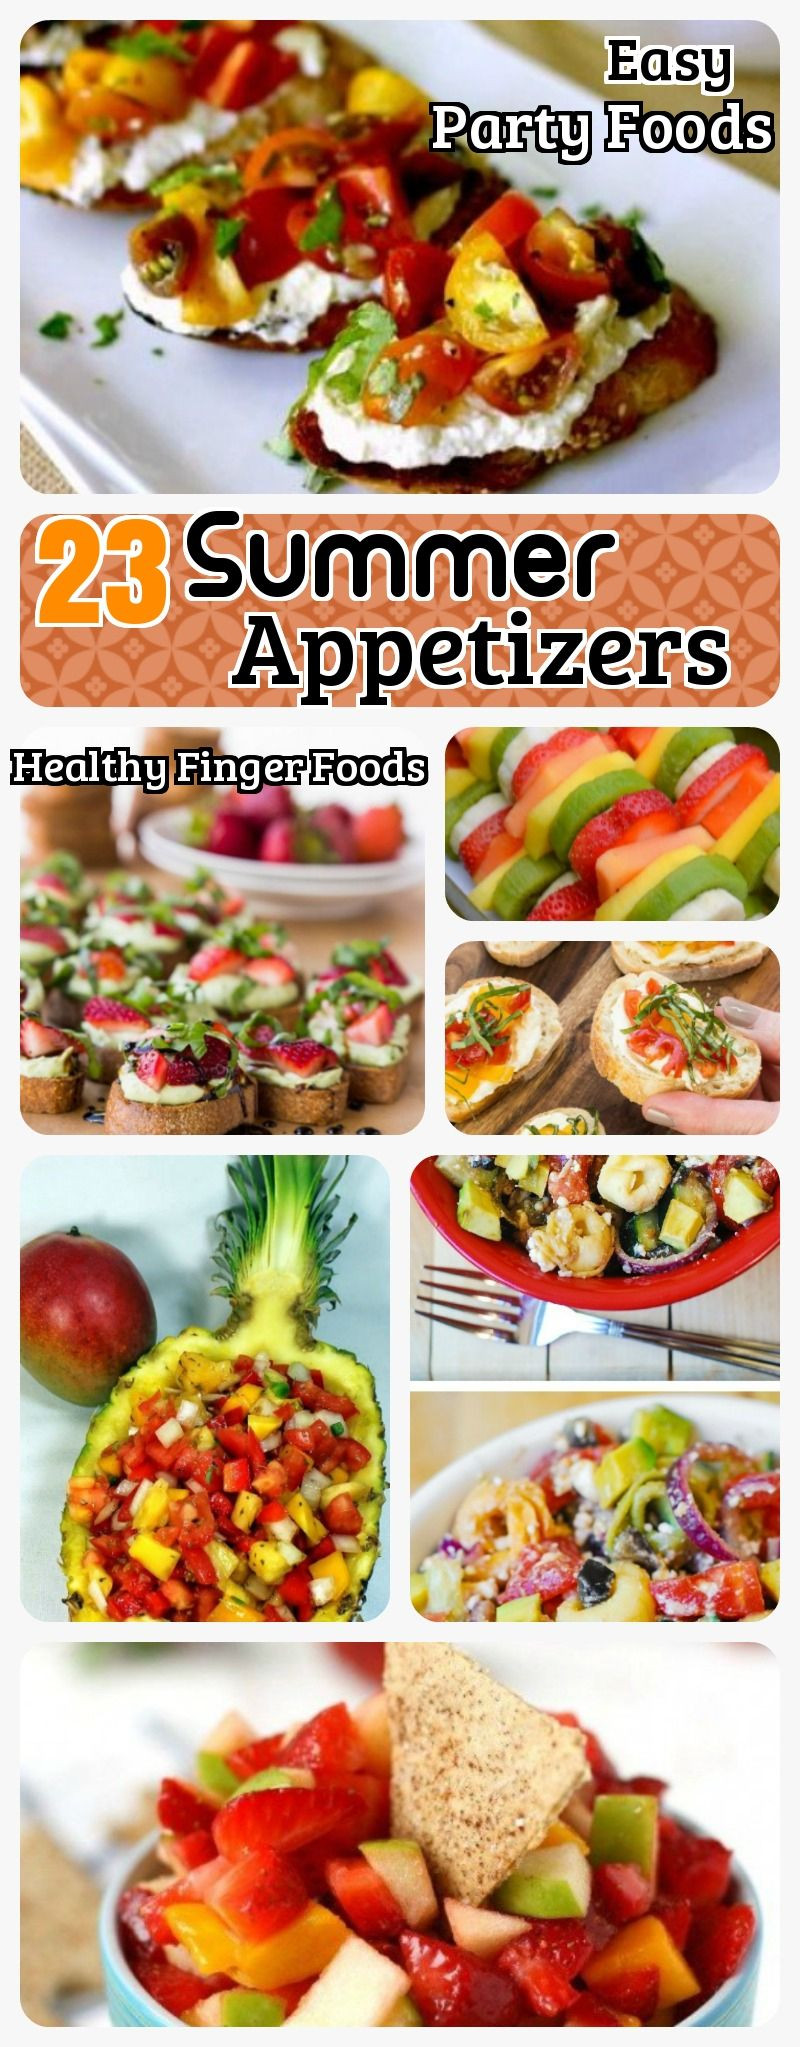 Summer Party Finger Foods
 23 Summer appetizers for Scorching Summer Easy Healthy